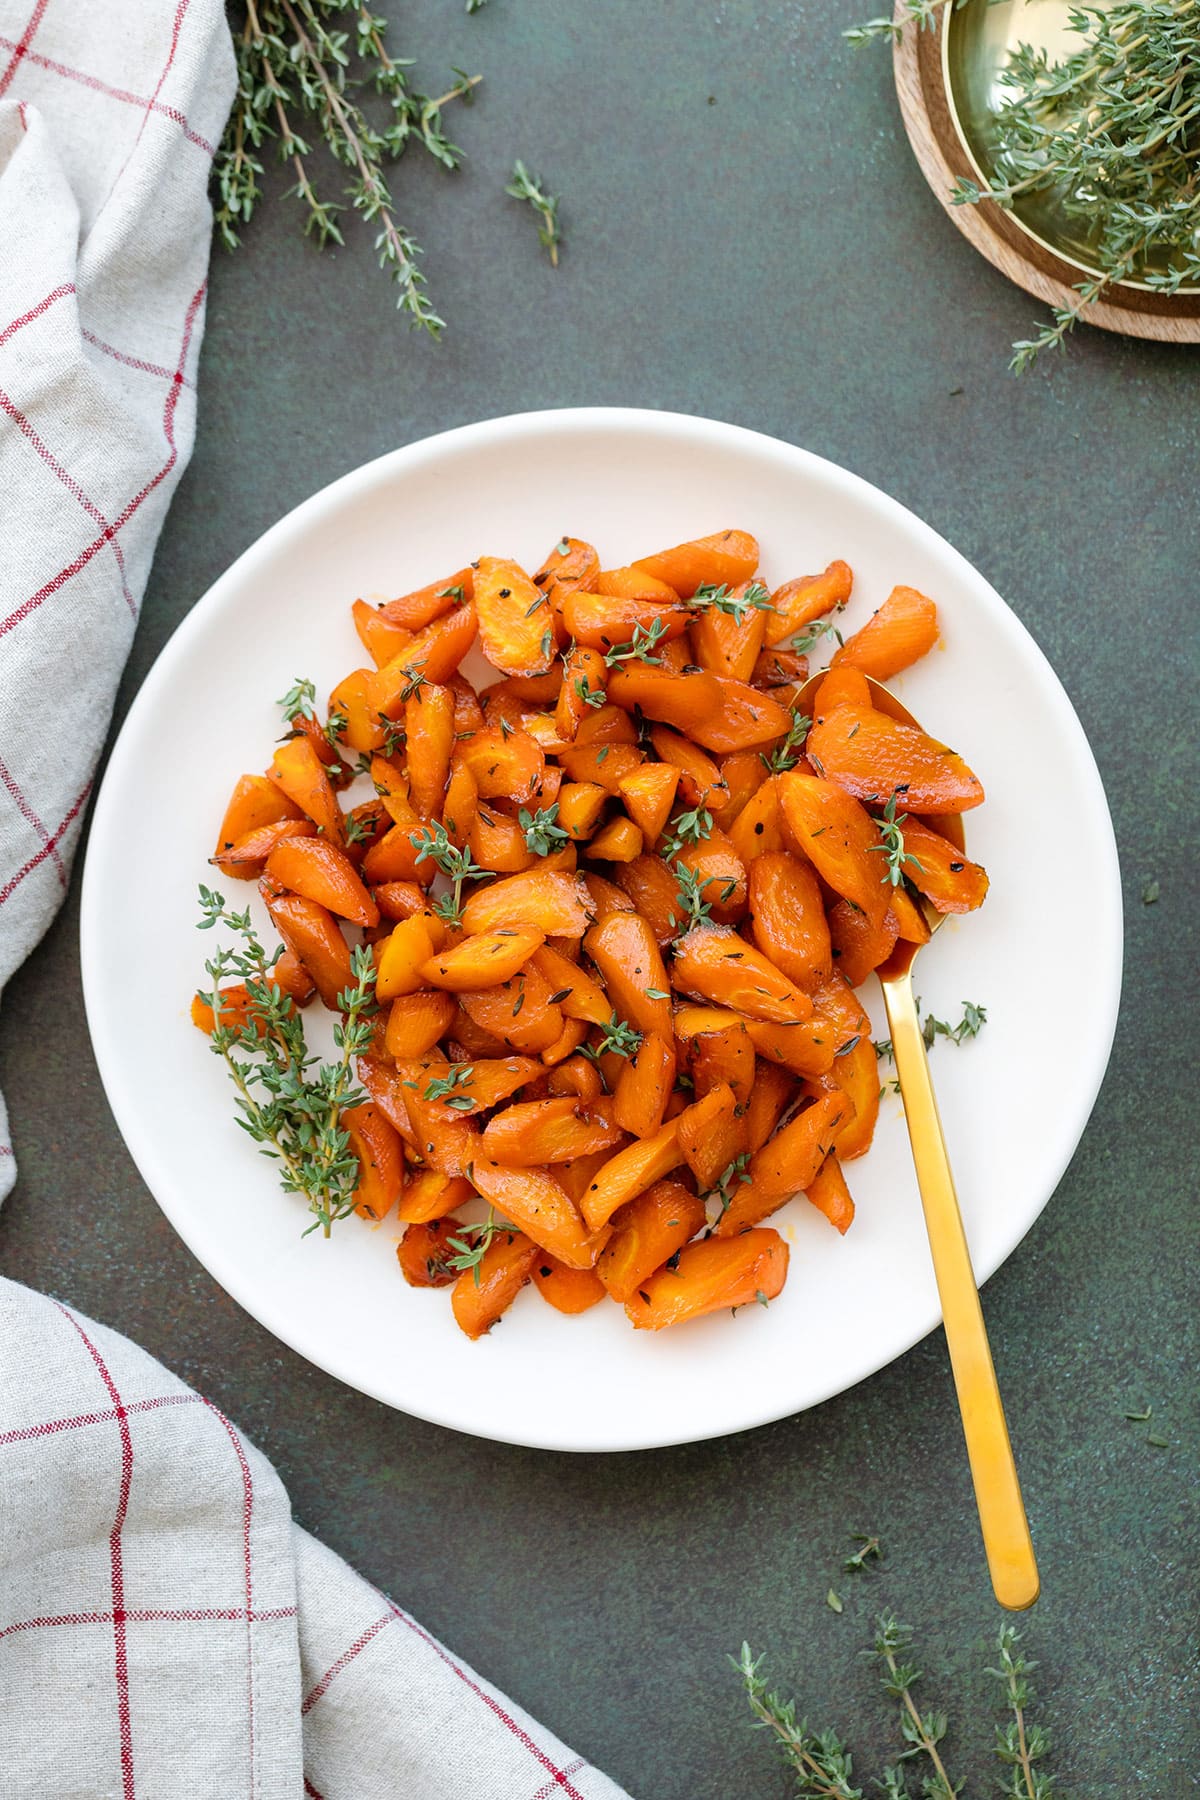 Roasted carrots garnished with fresh thyme on a white plate with a gold spoon on a dark green background.